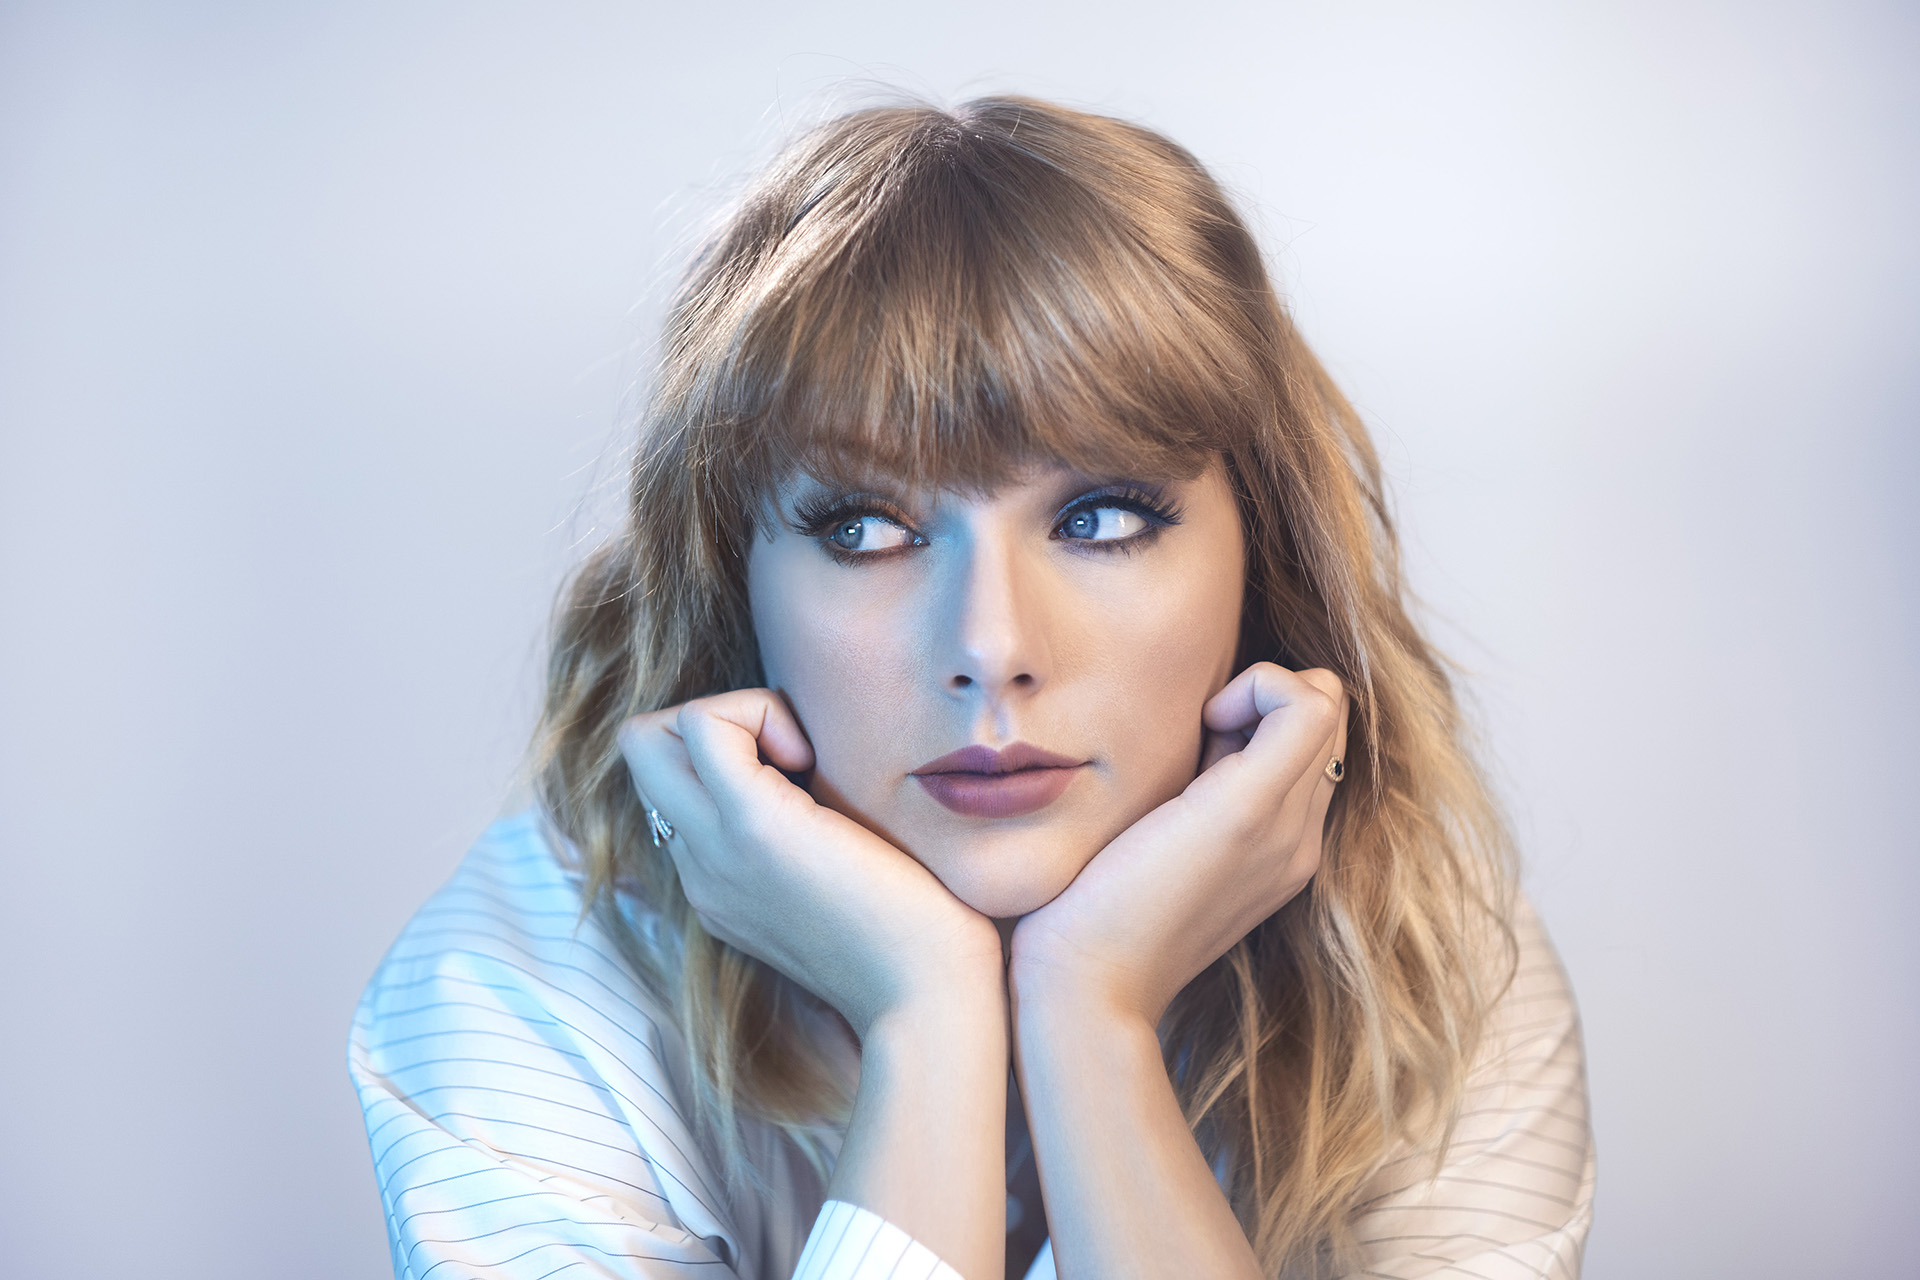 An In-depth Analysis of Taylor Swift's Impact on the Music Industry